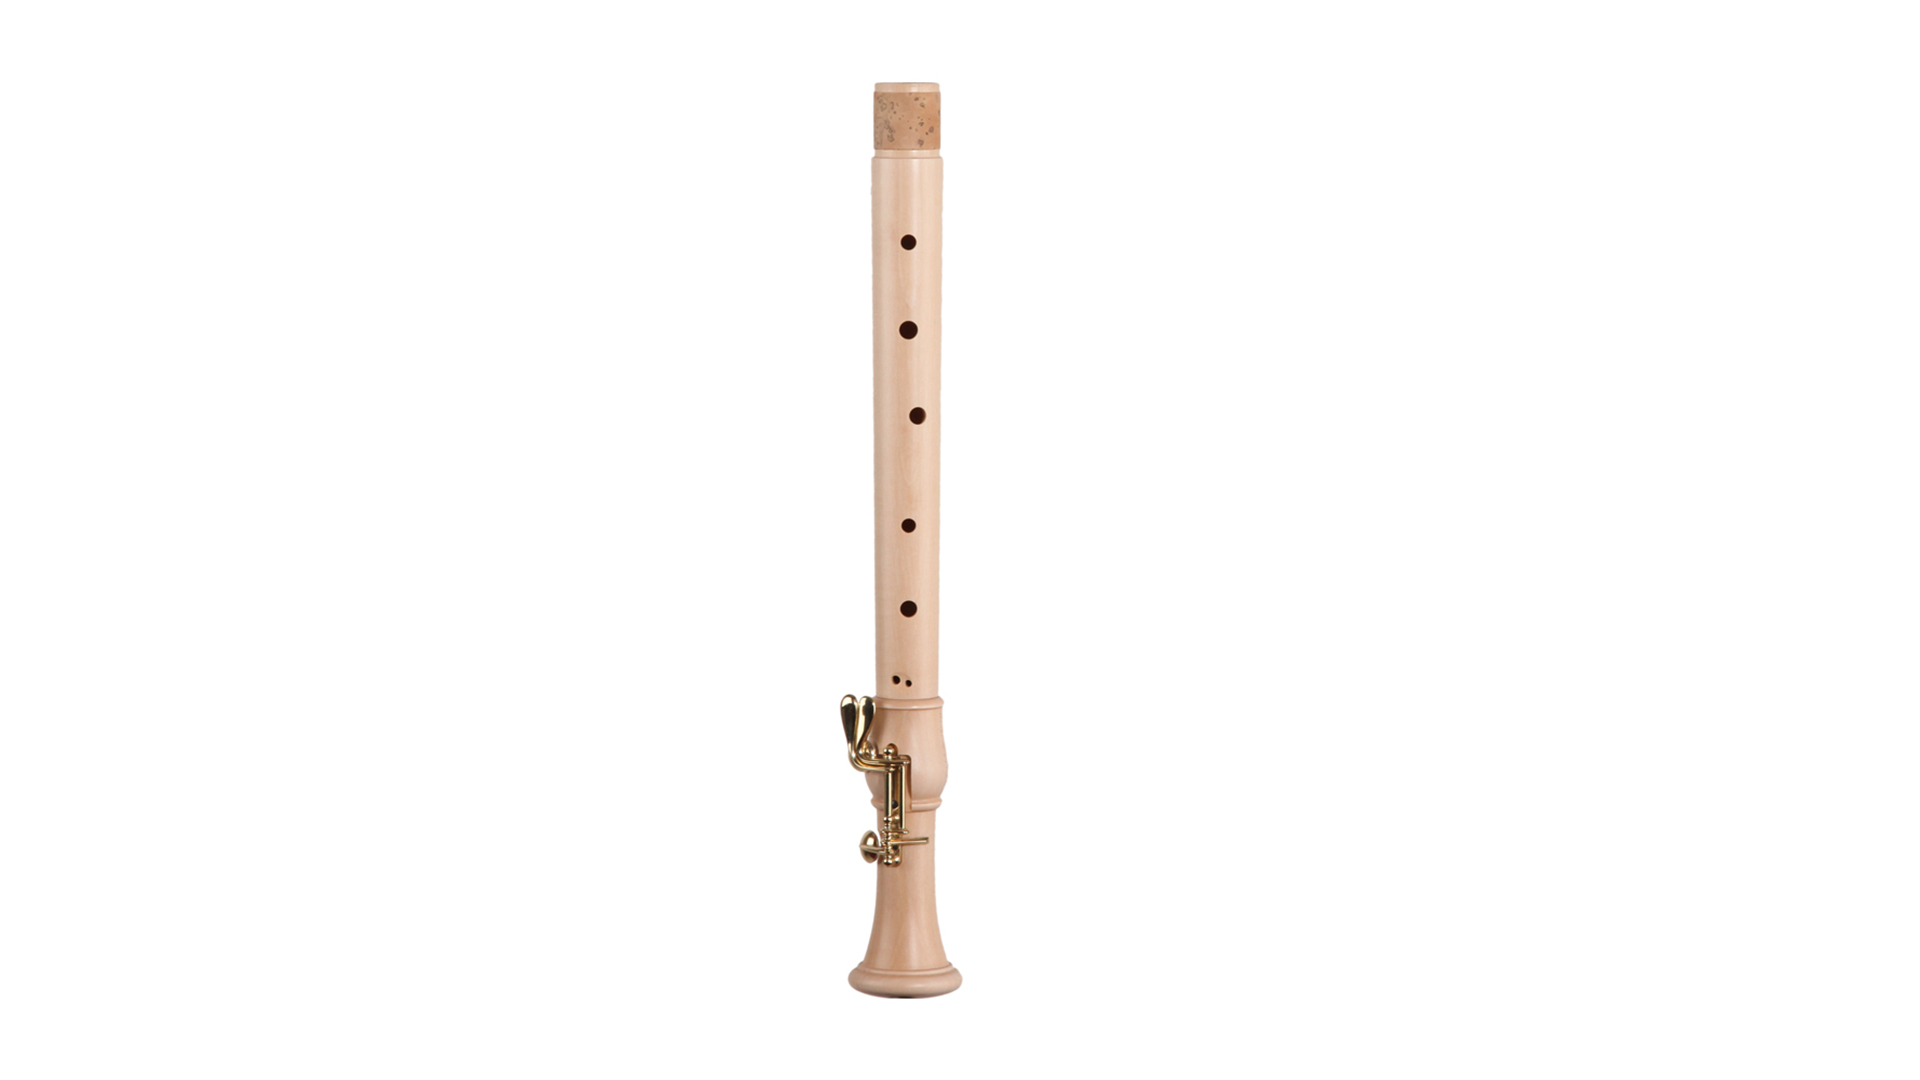 Moeck, "Flauto Rondo", tenor in c', baroque double hole, with double key, maple